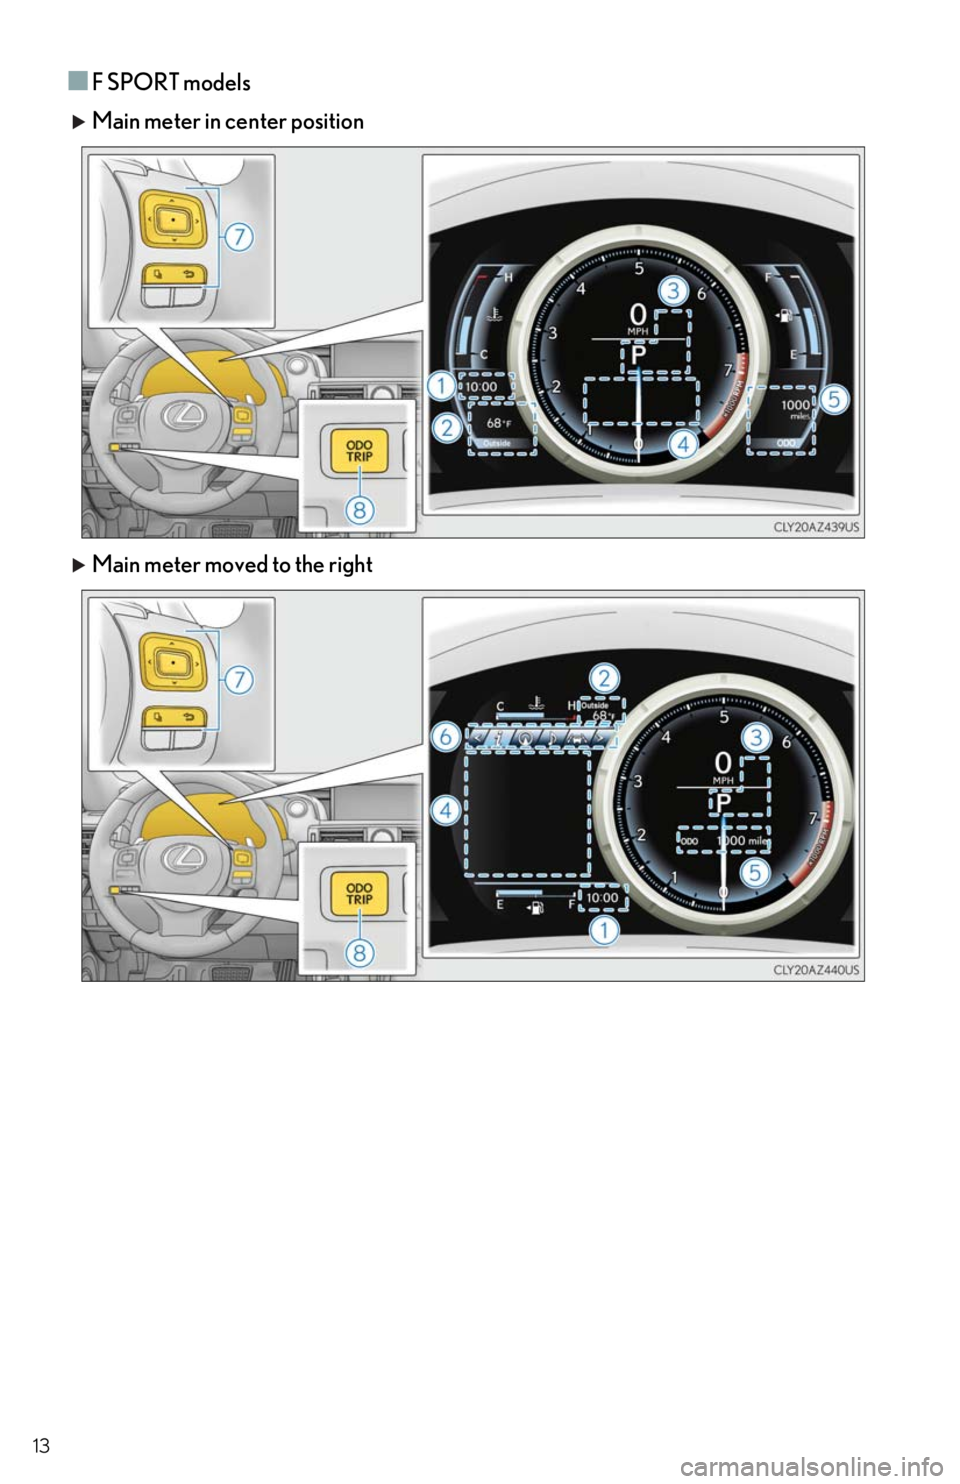 Lexus IS300 2019   / LEXUS 2019 IS300,IS350  QUICK GUIDE (OM53E86U) User Guide 13
■F SPORT models
 Main meter in center position
 Main meter moved to the right 